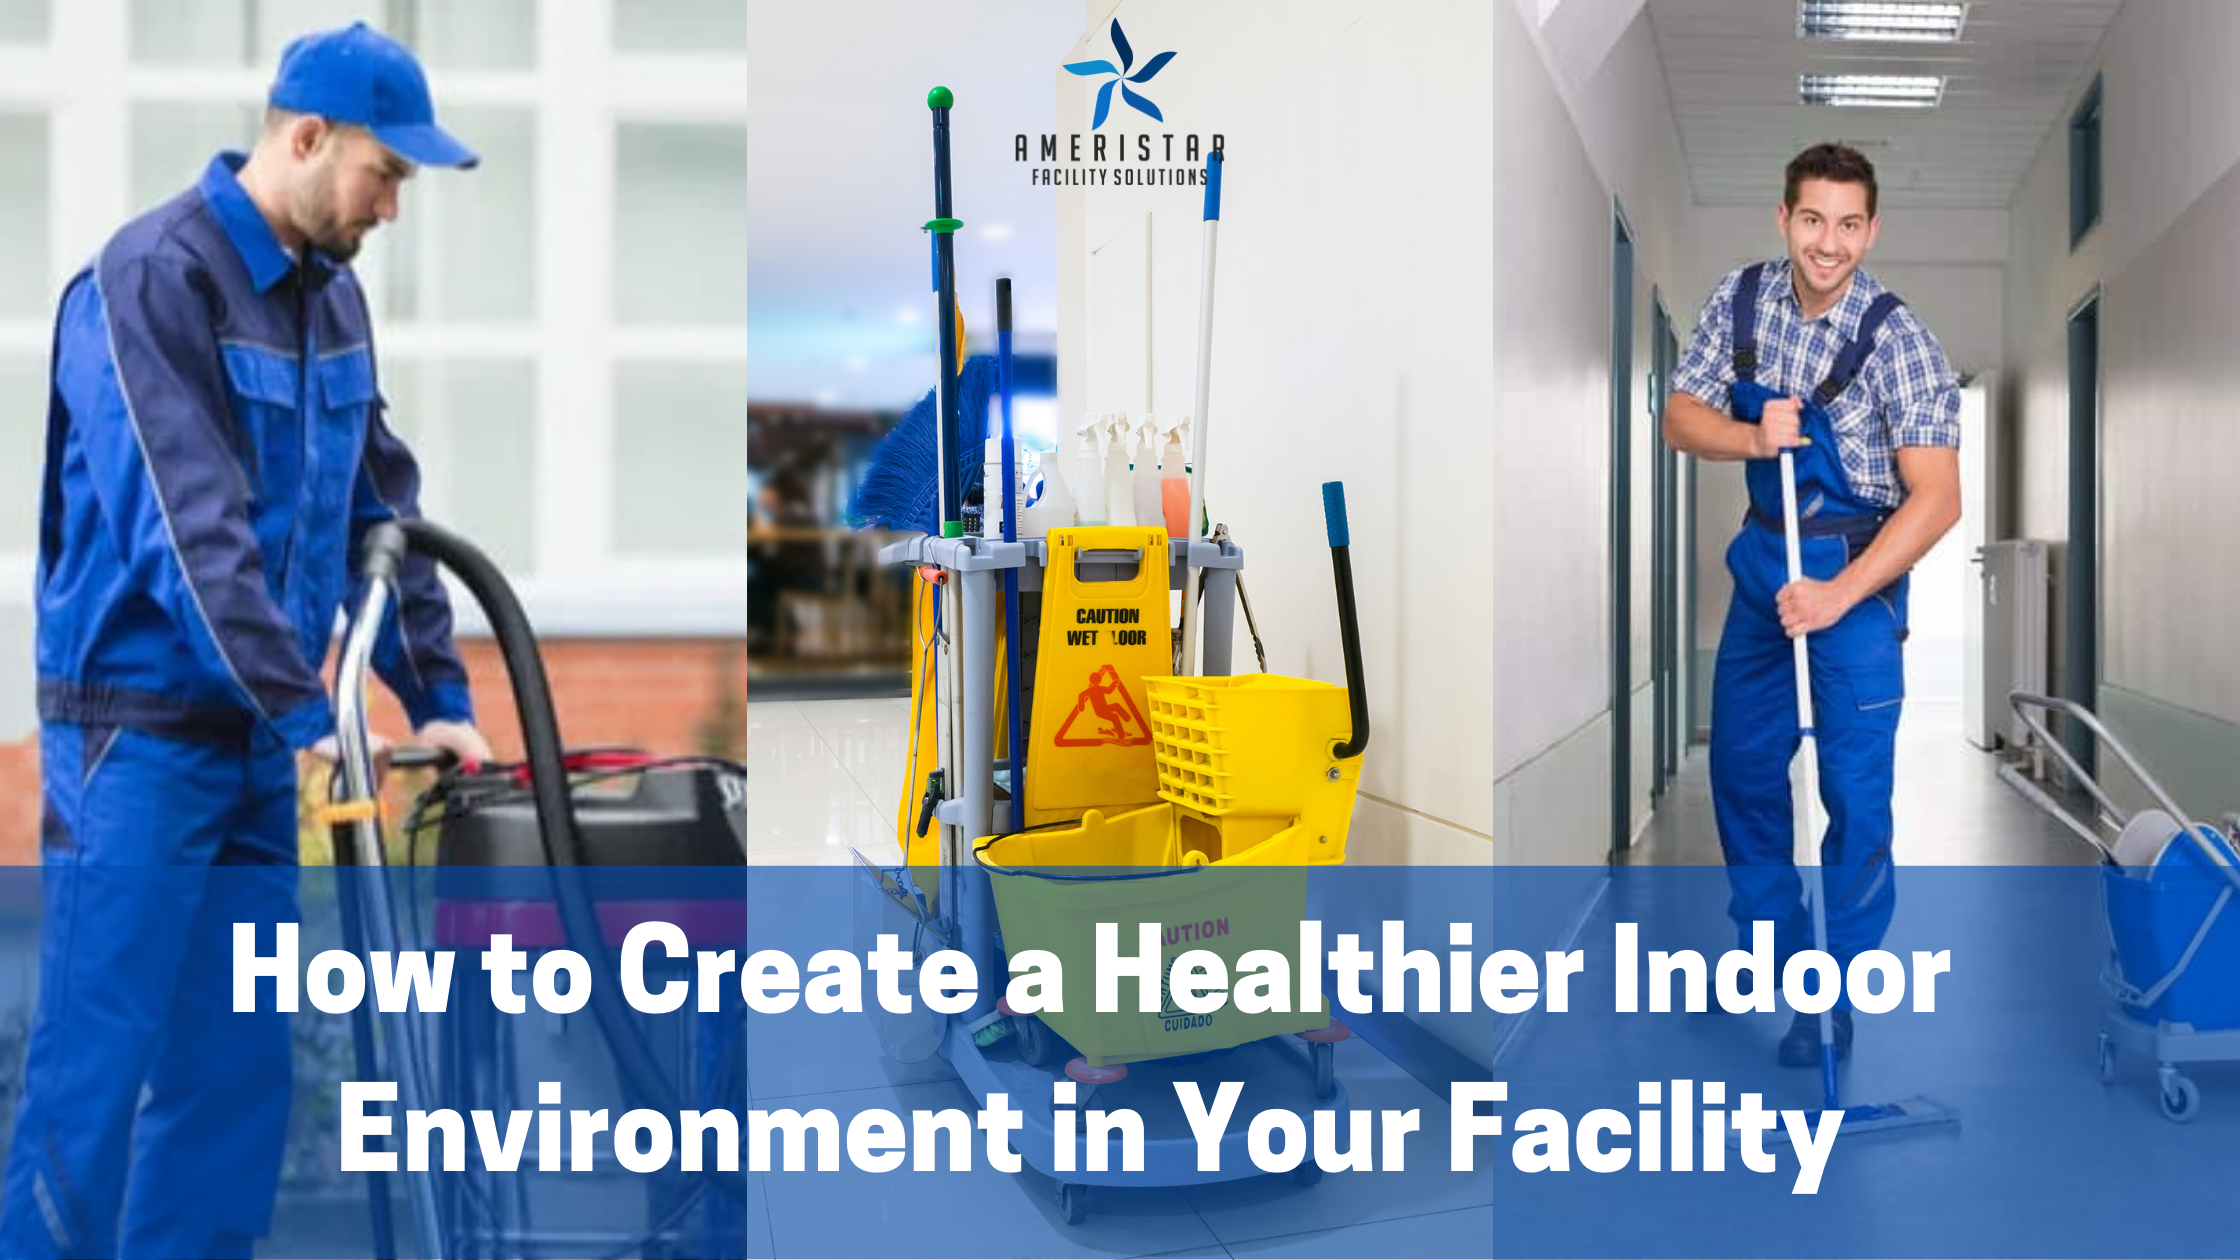 How to Create a Healthy Indoor Environment at your Facility